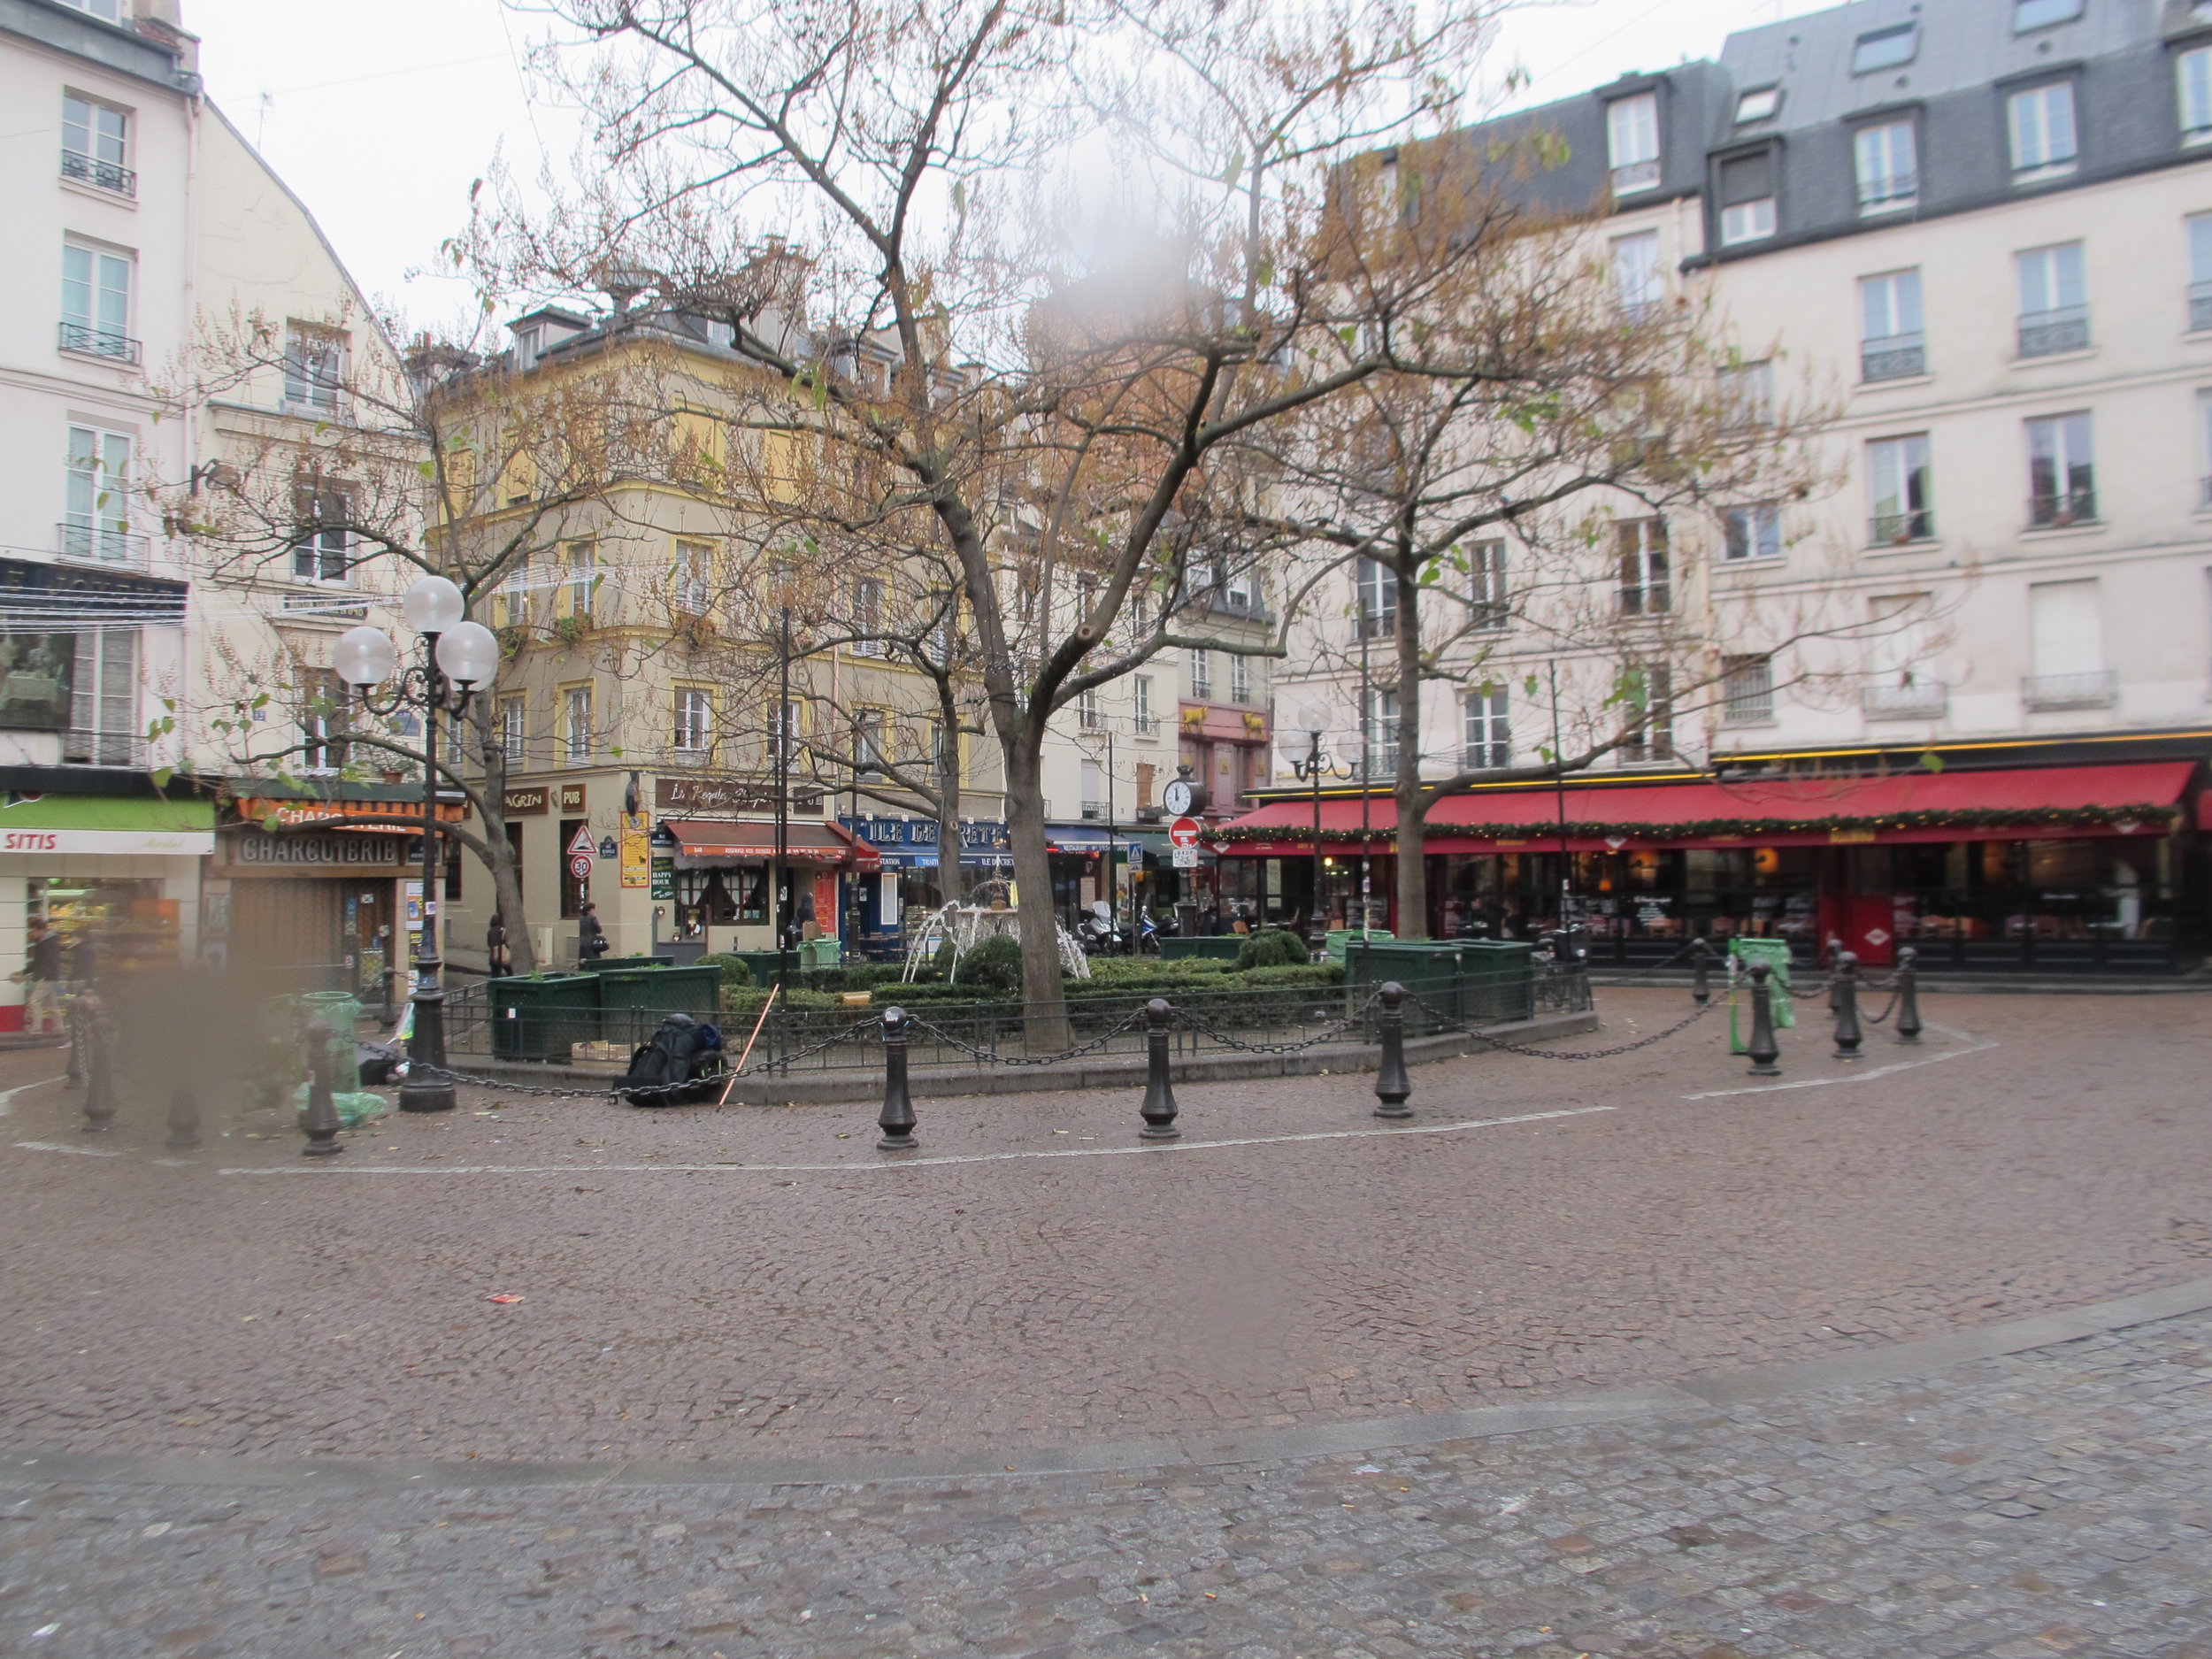 6. La Place de la Contrescarpe, around the corner from Hemingway's first apartment in Paris. He mentions The Cafe des Amateurs, with the red awning, now the Cafe Delmas, in The Sun Also Rises.JPG